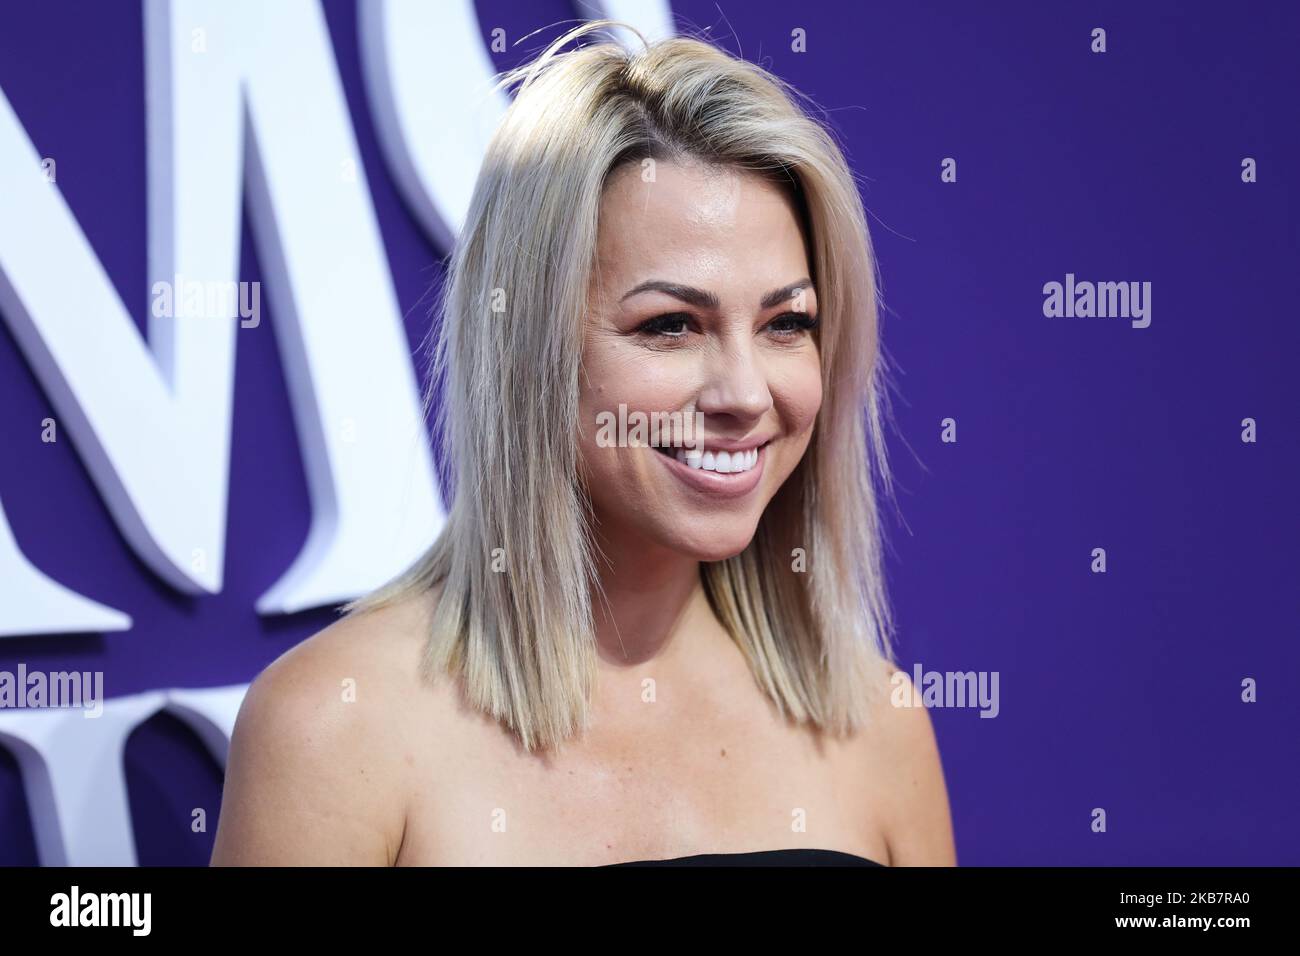 CENTURY CITY, LOS ANGELES, CALIFORNIA, USA - OCTOBER 06: Jessica Hall arrives at the World Premiere Of MGM's 'The Addams Family' held at the Westfield Century City AMC on October 6, 2019 in Century City, Los Angeles, California, United States. (Photo by Xavier Collin/Image Press Agency/NurPhoto) Stock Photo